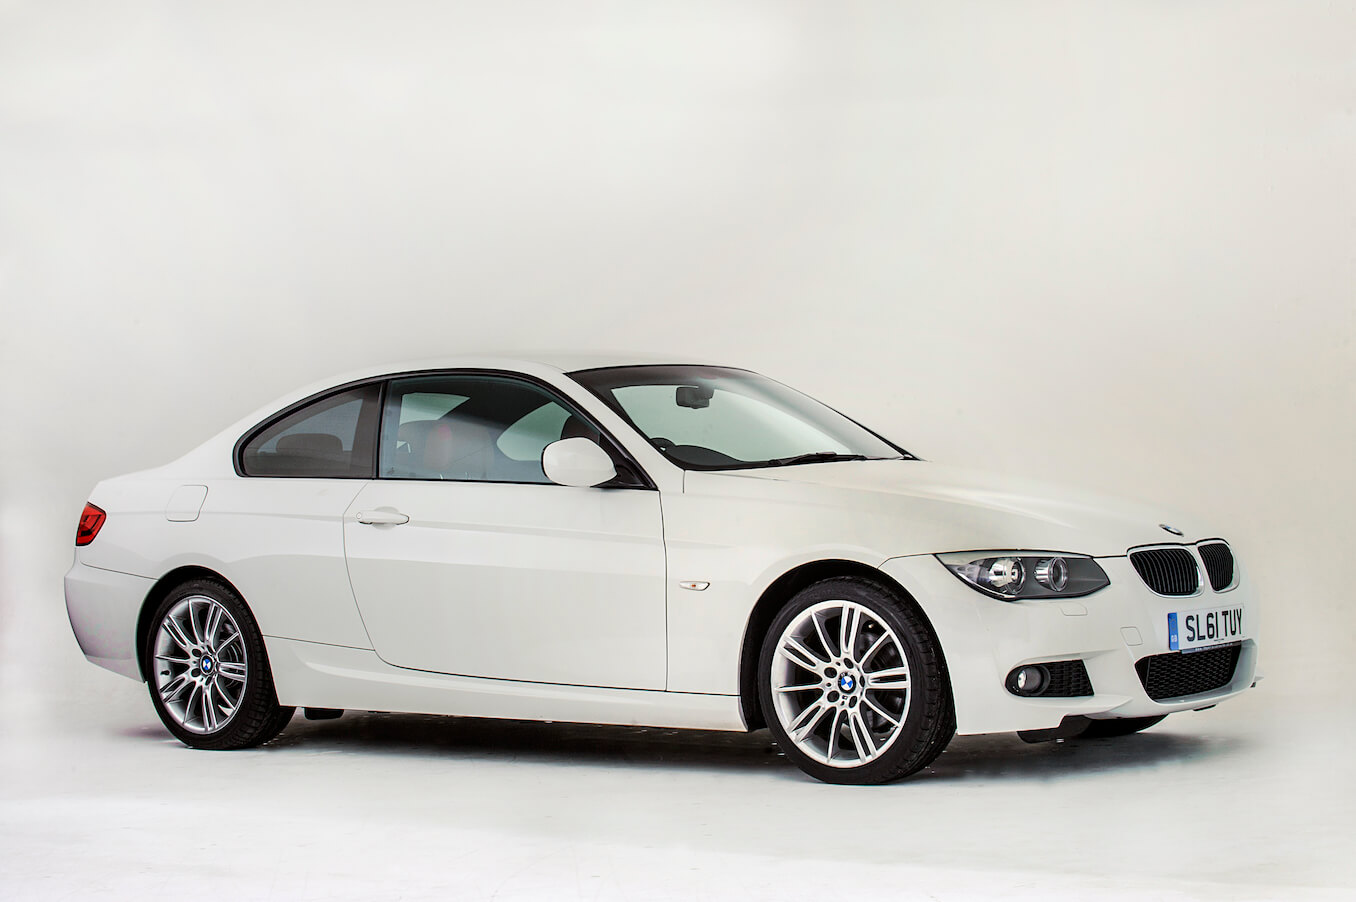 A 2011 BMW 3 Series in white on display against a white background. The 2011 BMW complaints get kind of weird.